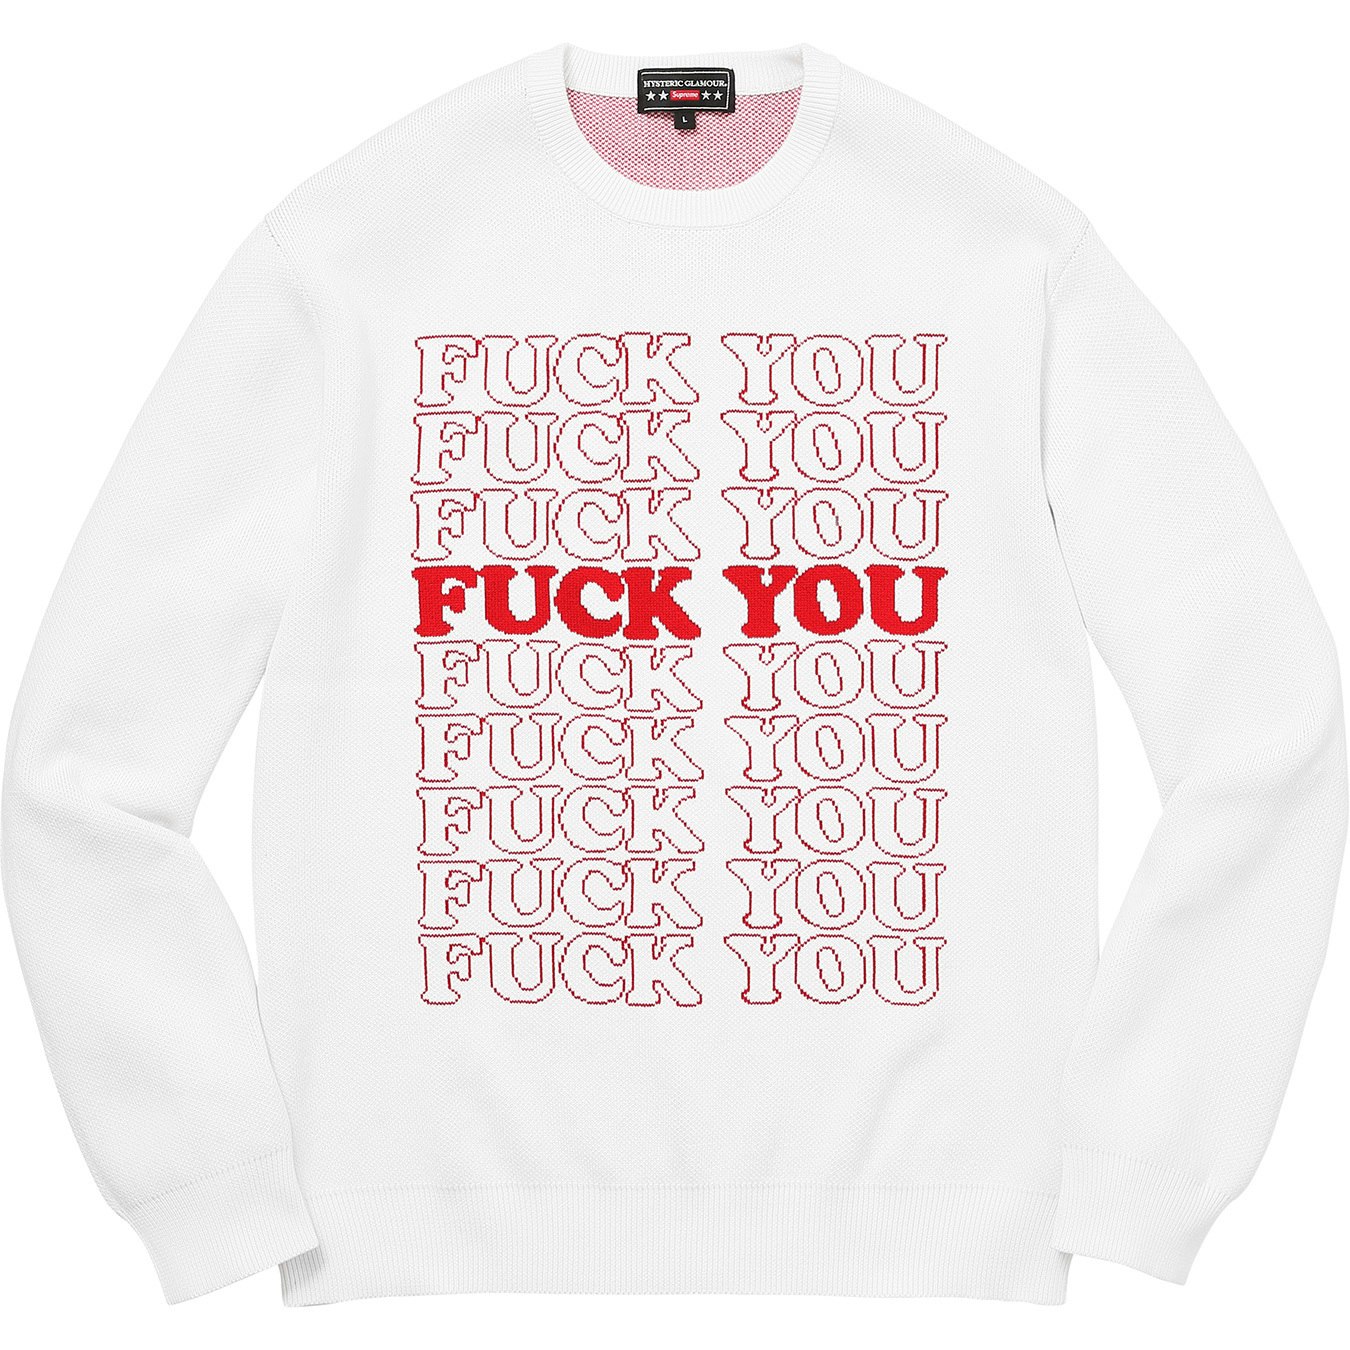 Supreme Hysteric Glamour Fuck You Sweater White - FW17